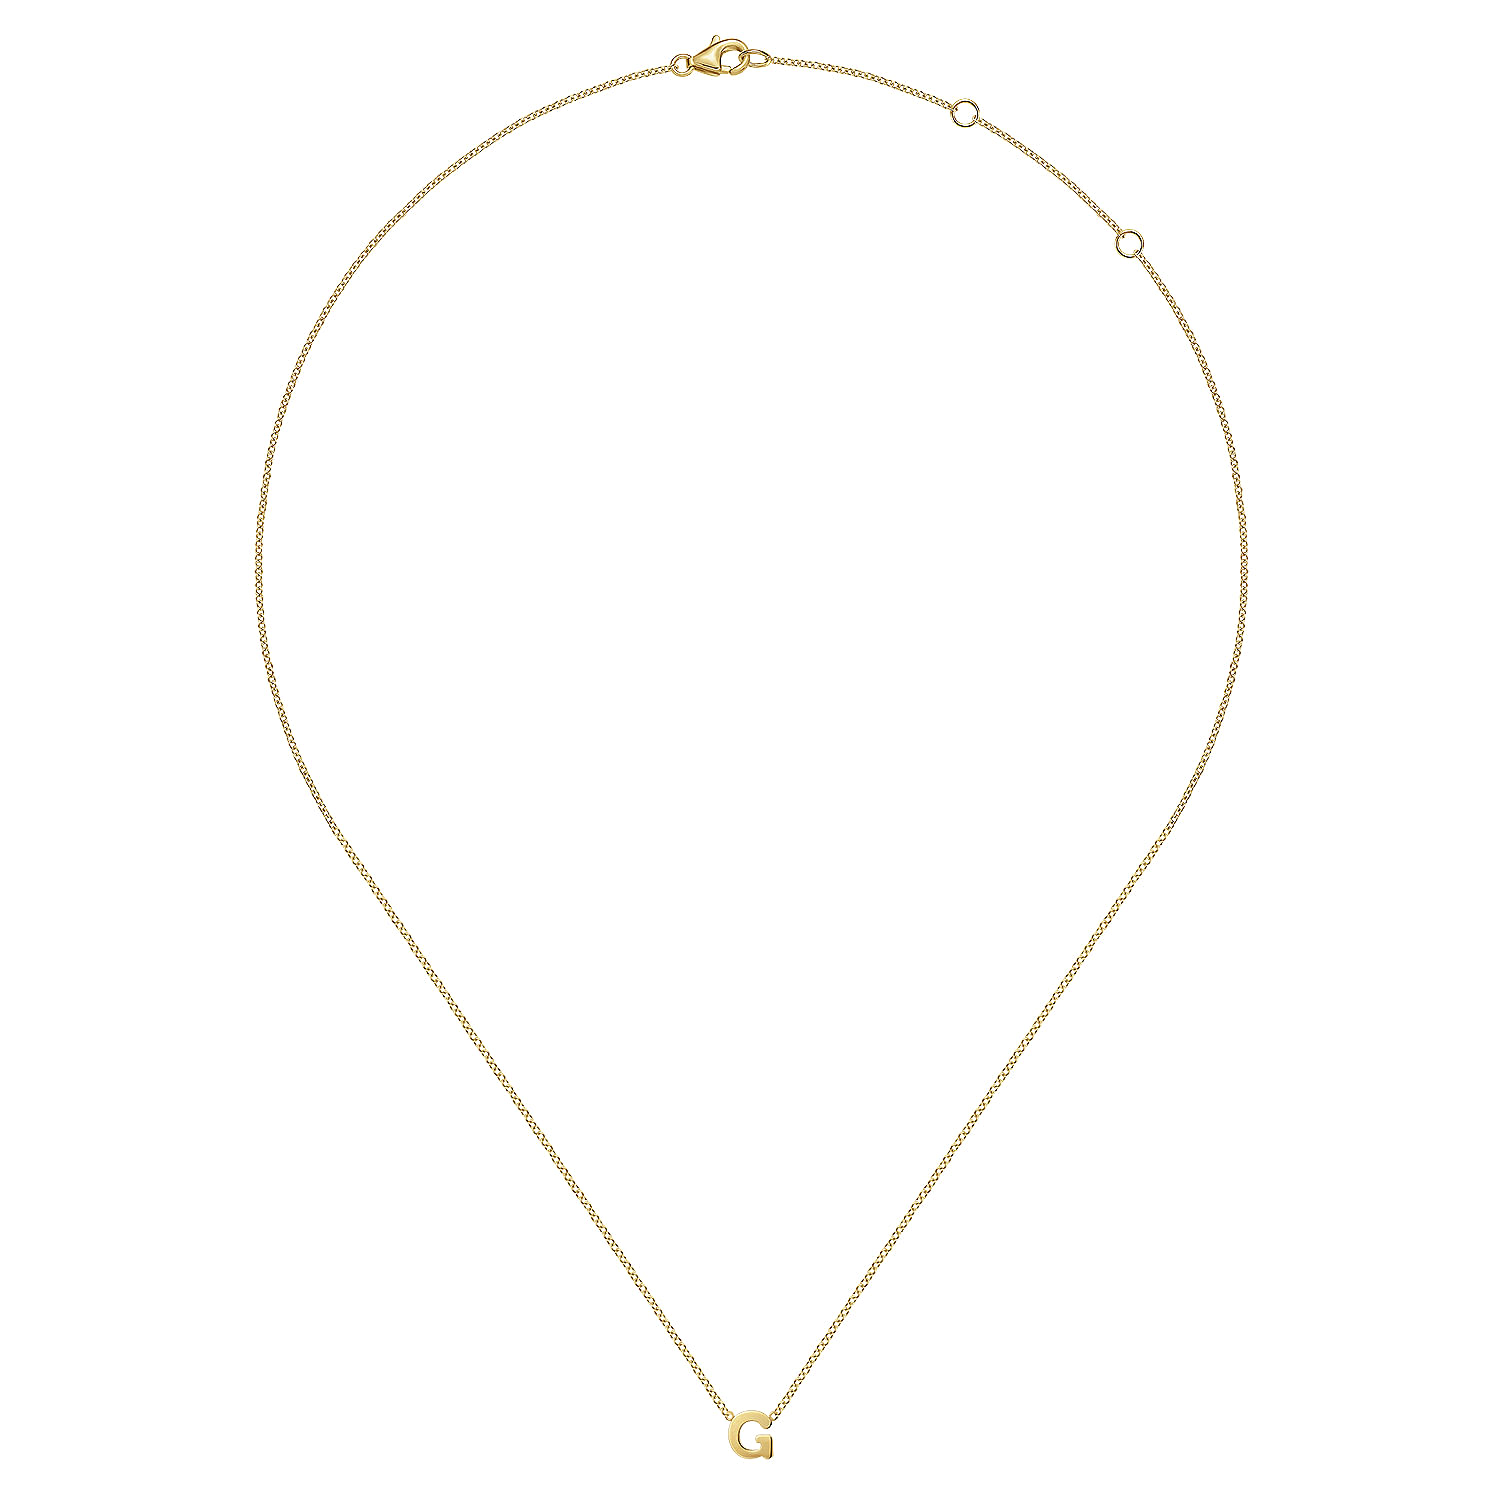 14K Yellow Gold G Initial Necklace